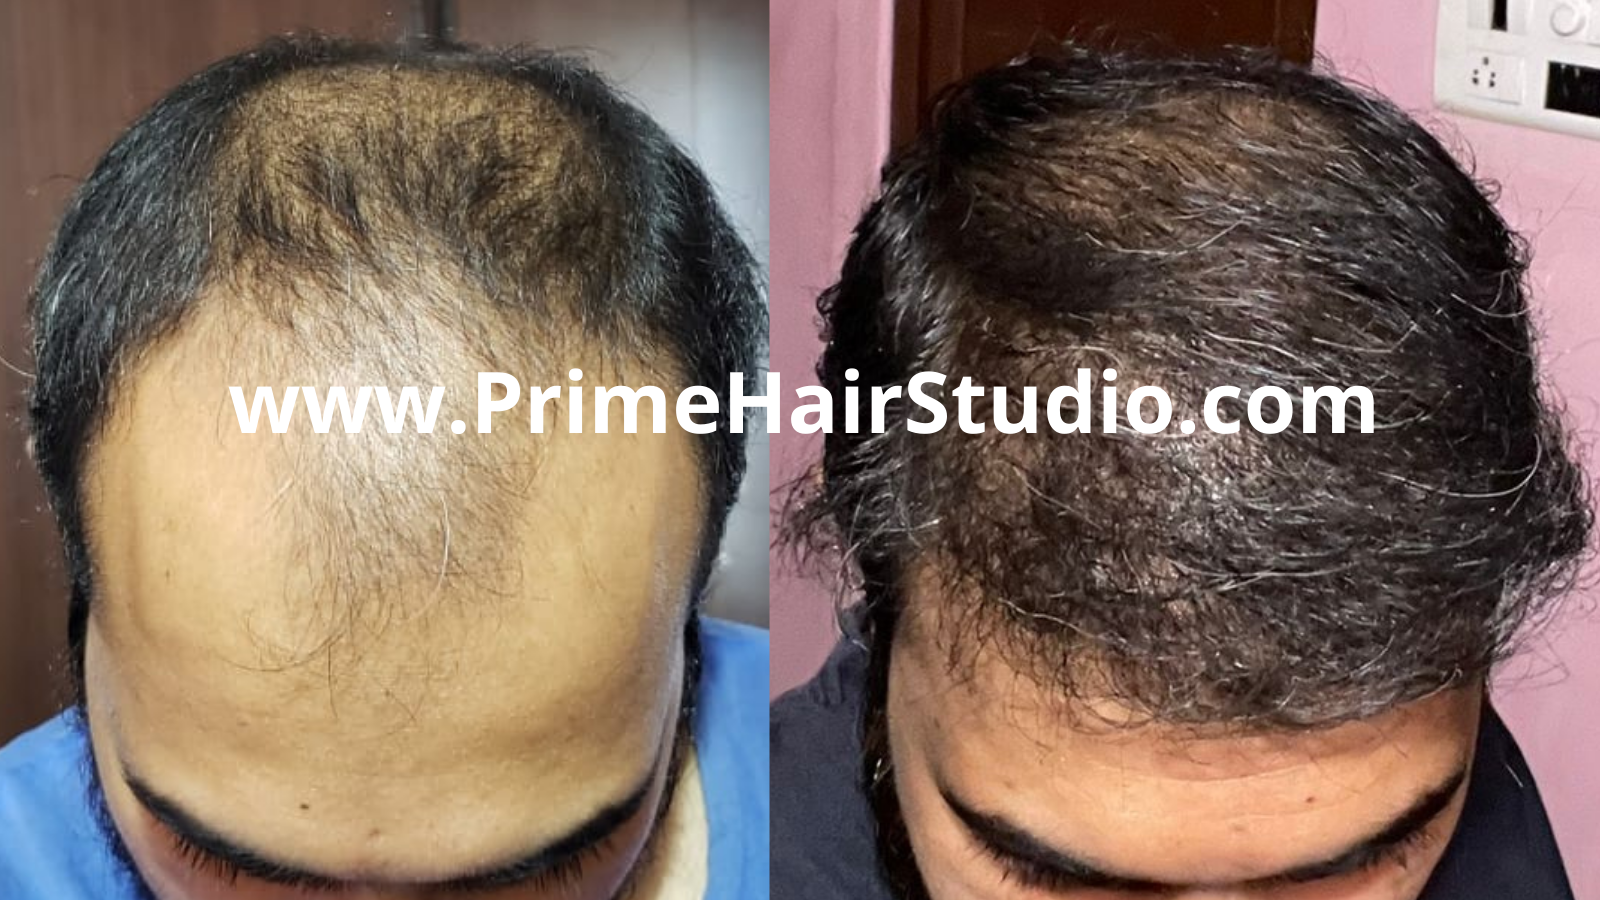 Hair Transplant Results - Before and After - Prime Hair Studio, Mumbai, India